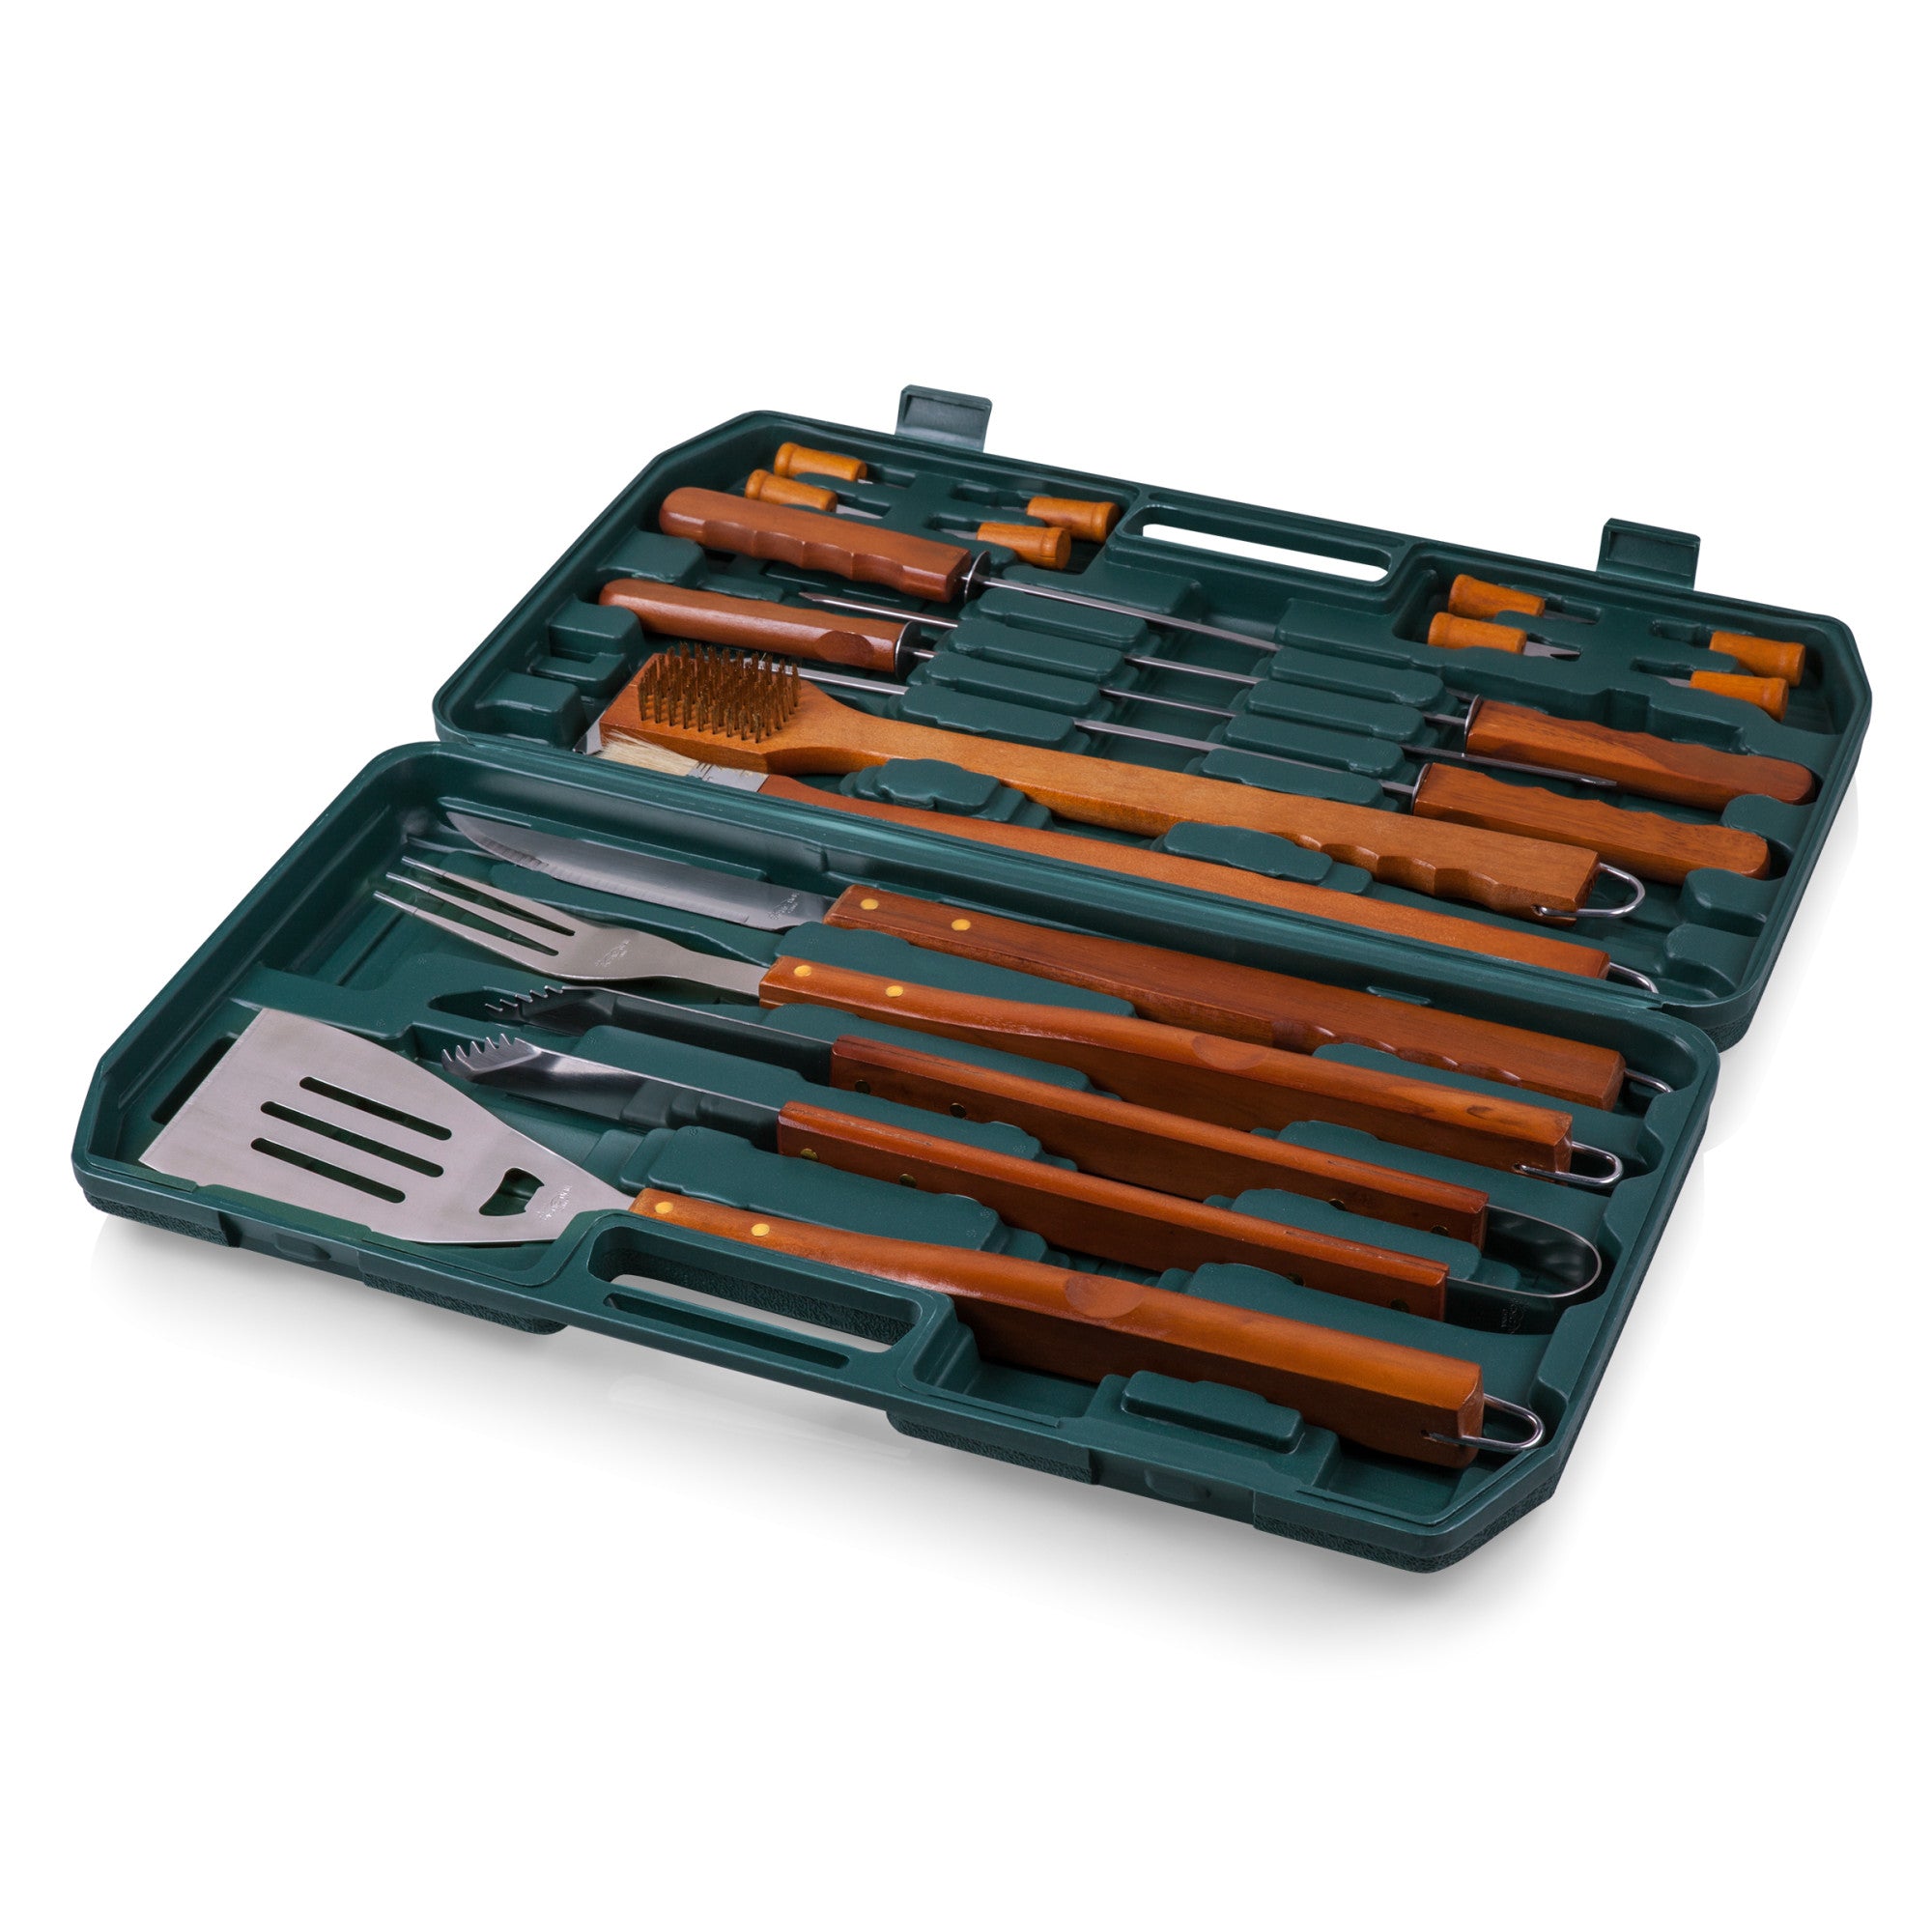 Brookstone BBQ Barbeque Grill Tool Accessory Set in Case 18